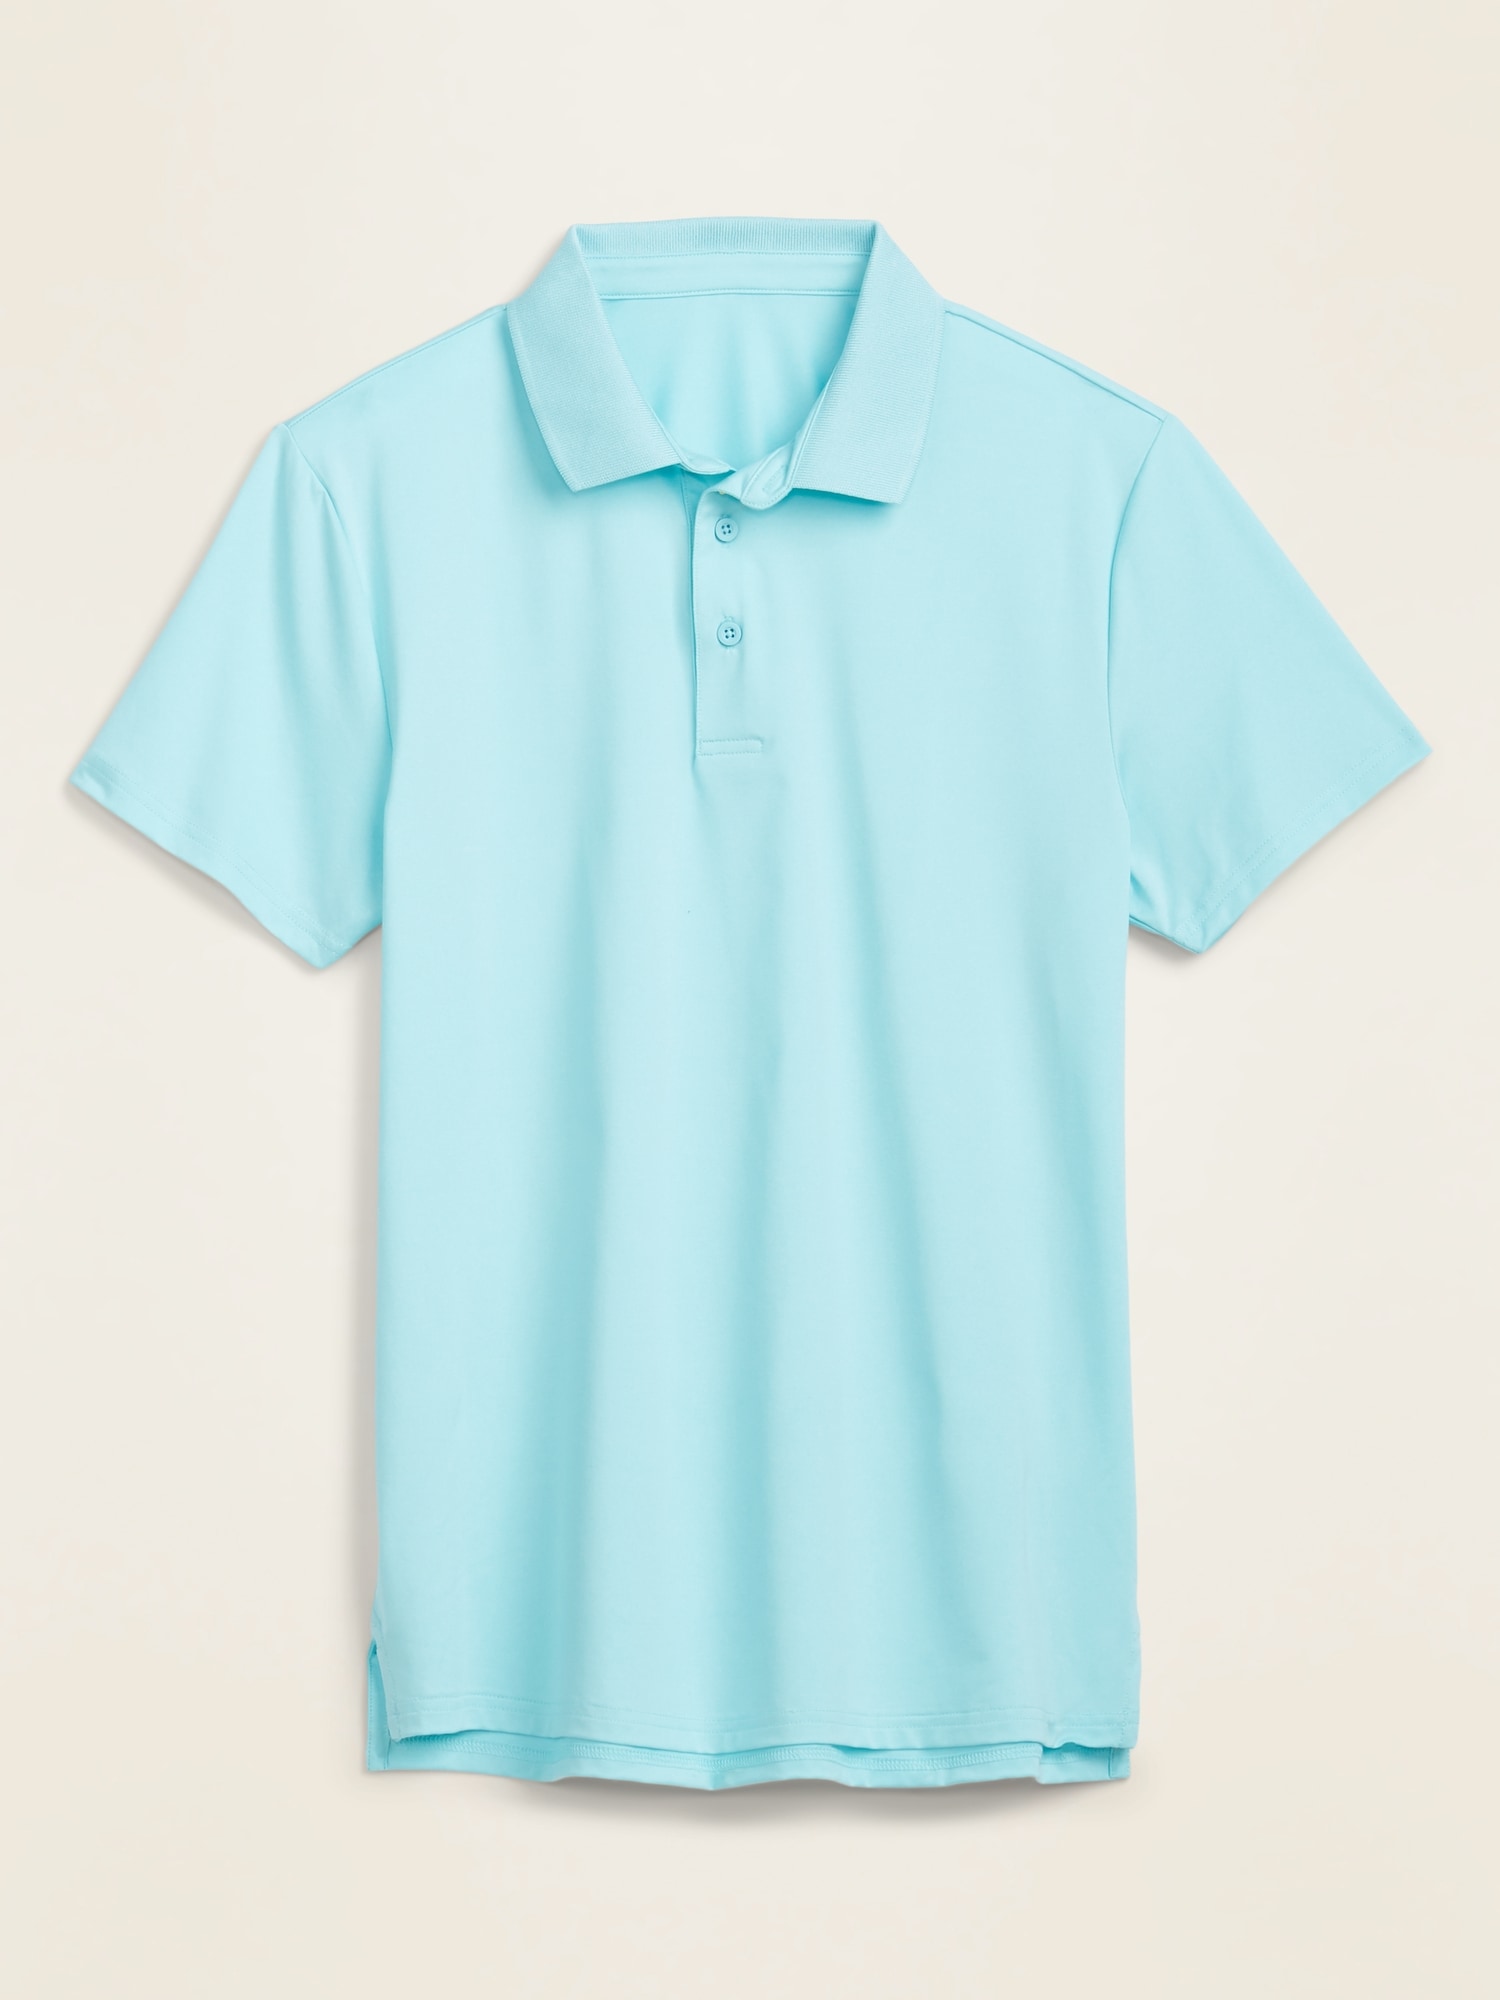 Luxe Dry-Quick Built-In Flex Short-Sleeve Polo for Men